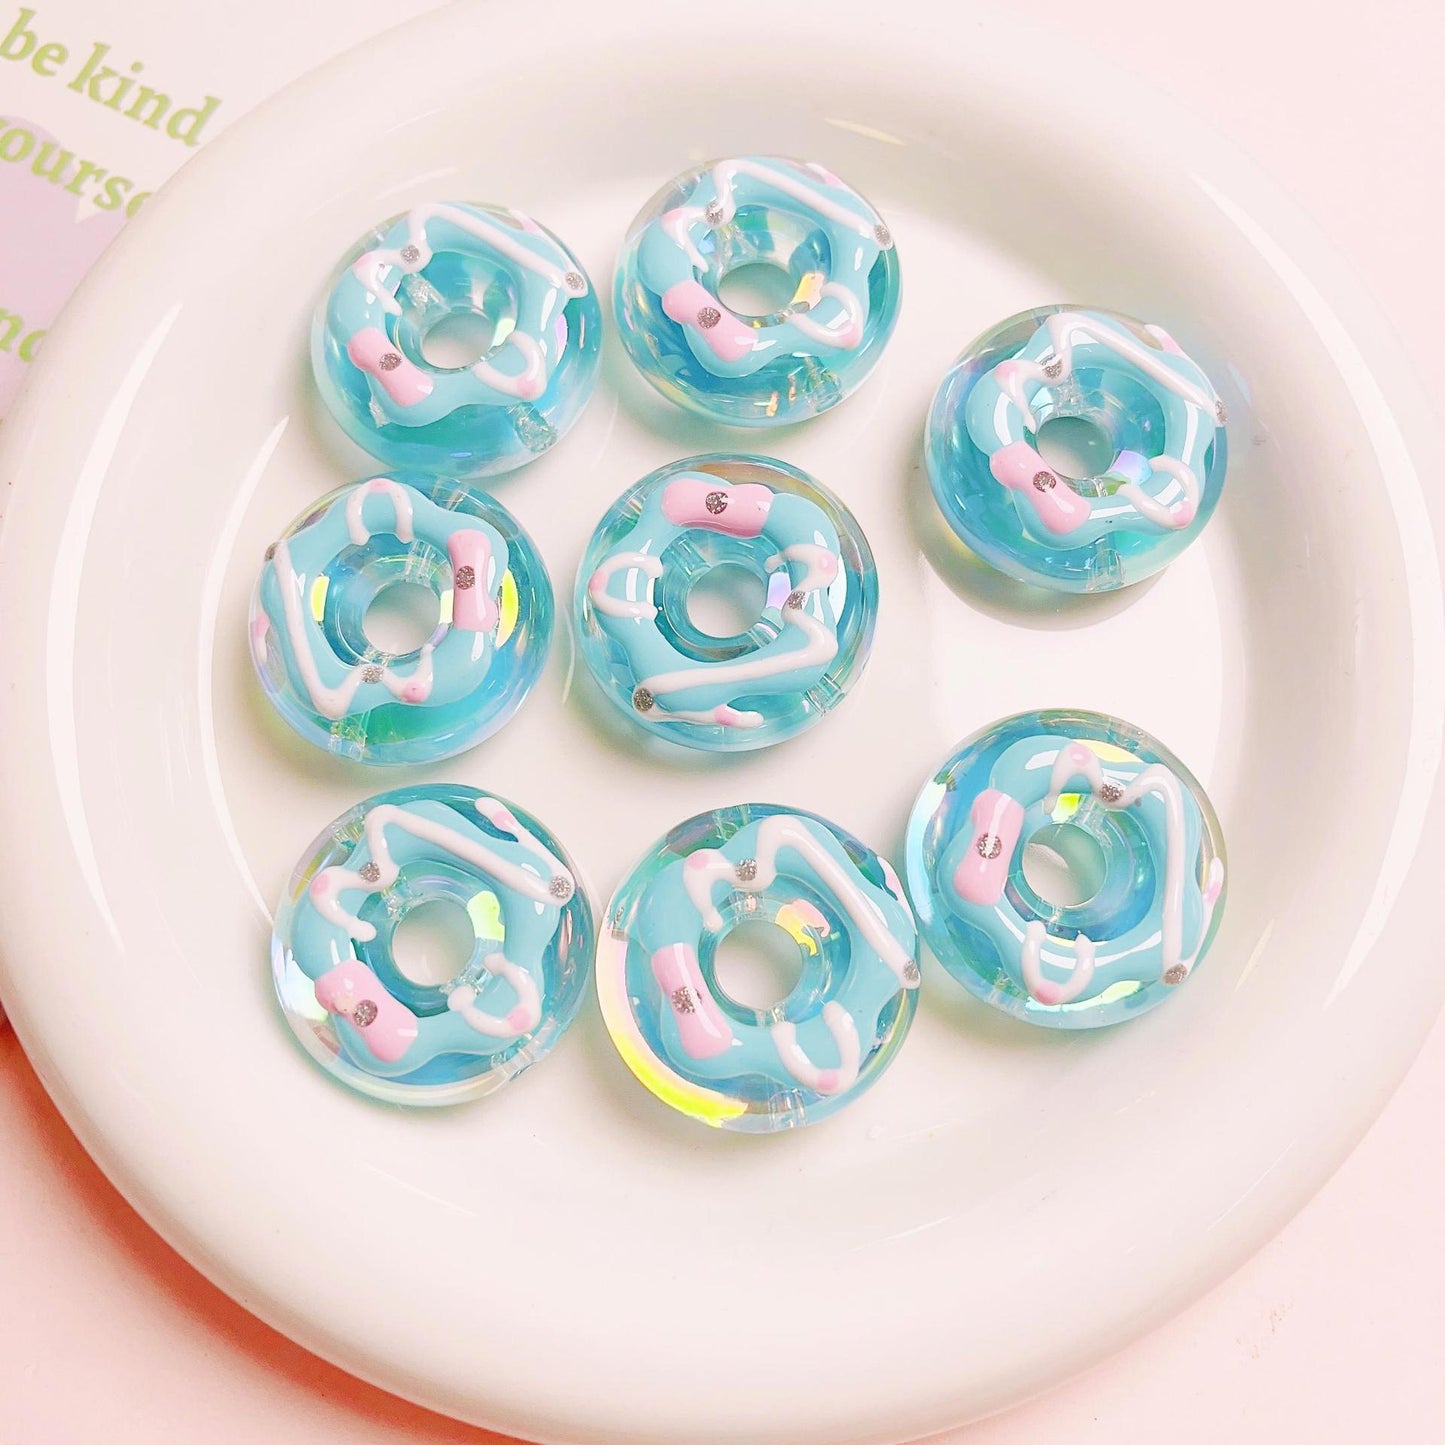 [Beads]Hand-painted donuts